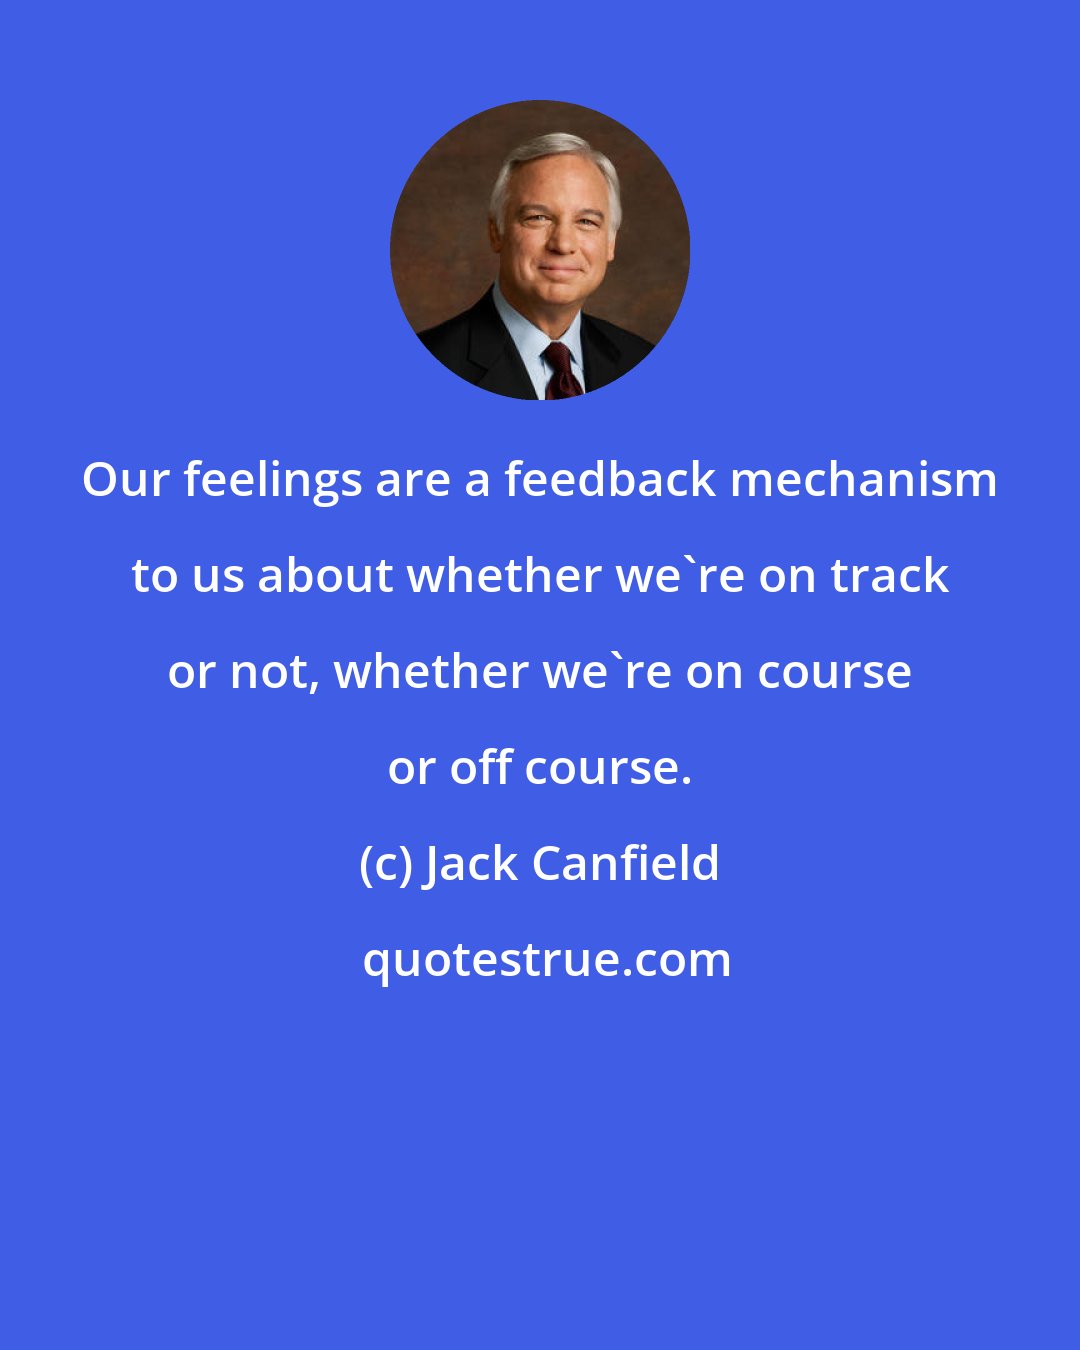 Jack Canfield: Our feelings are a feedback mechanism to us about whether we're on track or not, whether we're on course or off course.